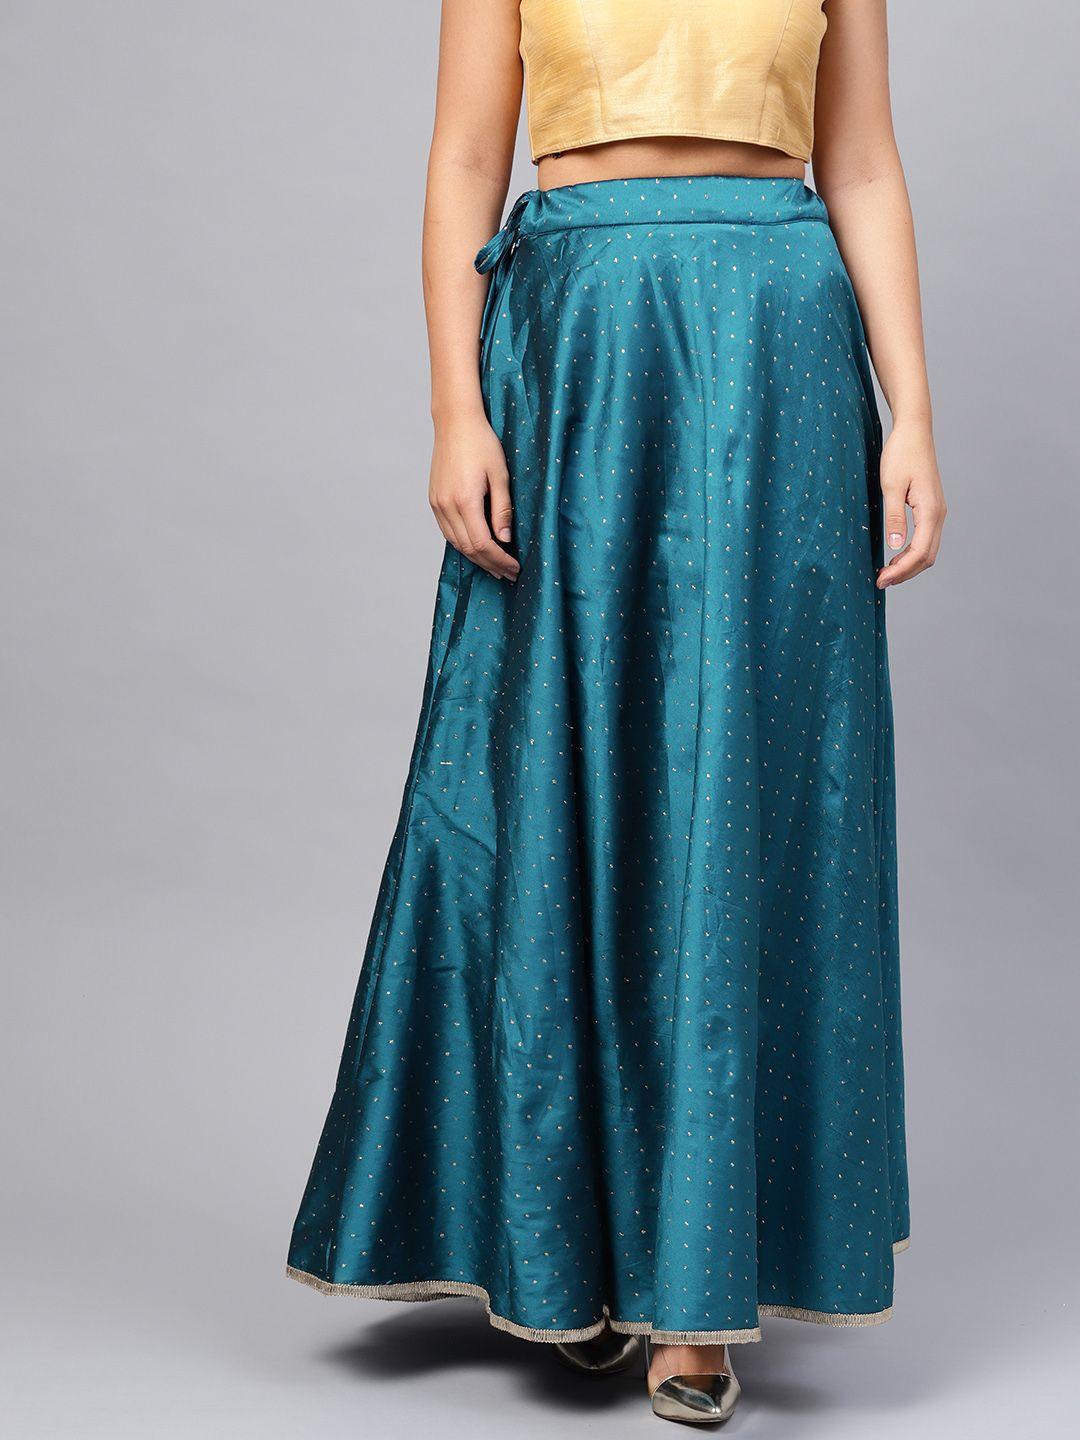 inddus women teal blue & golden embroidered maxi flared skirt